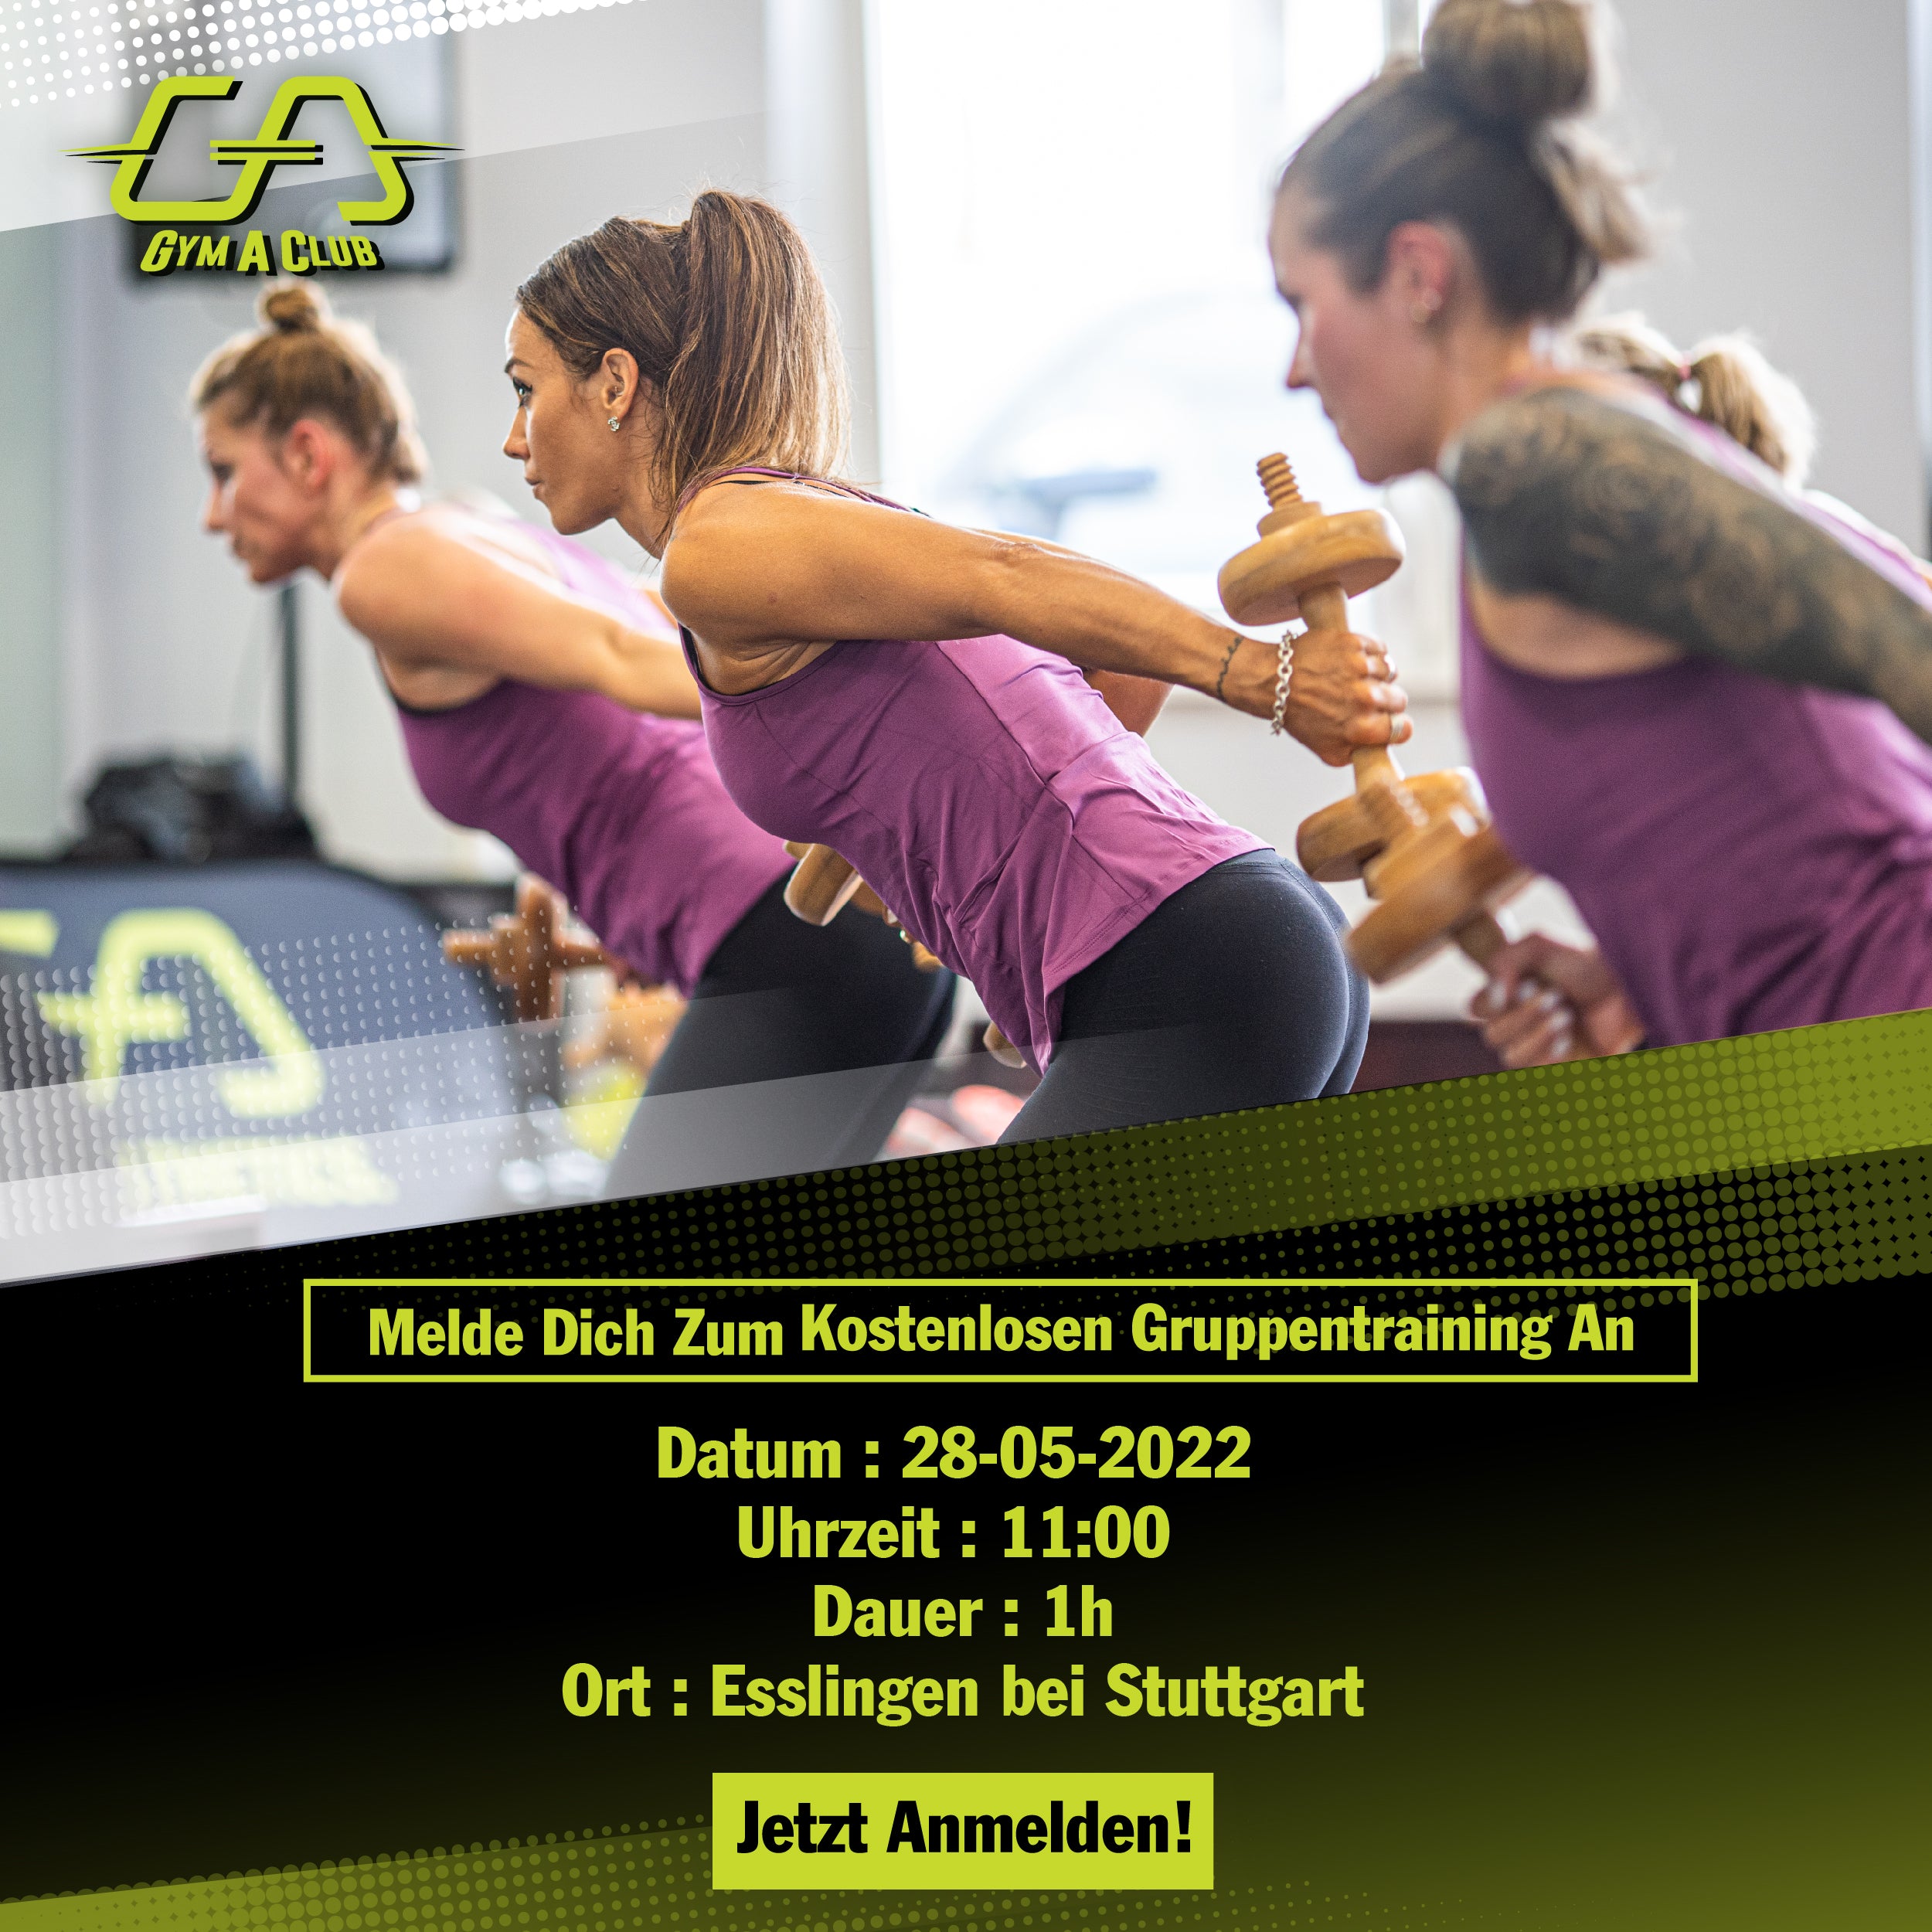 Gym A Club - Registration for the Gym A Club course on May 28, 2022 | Gym Aesthetics